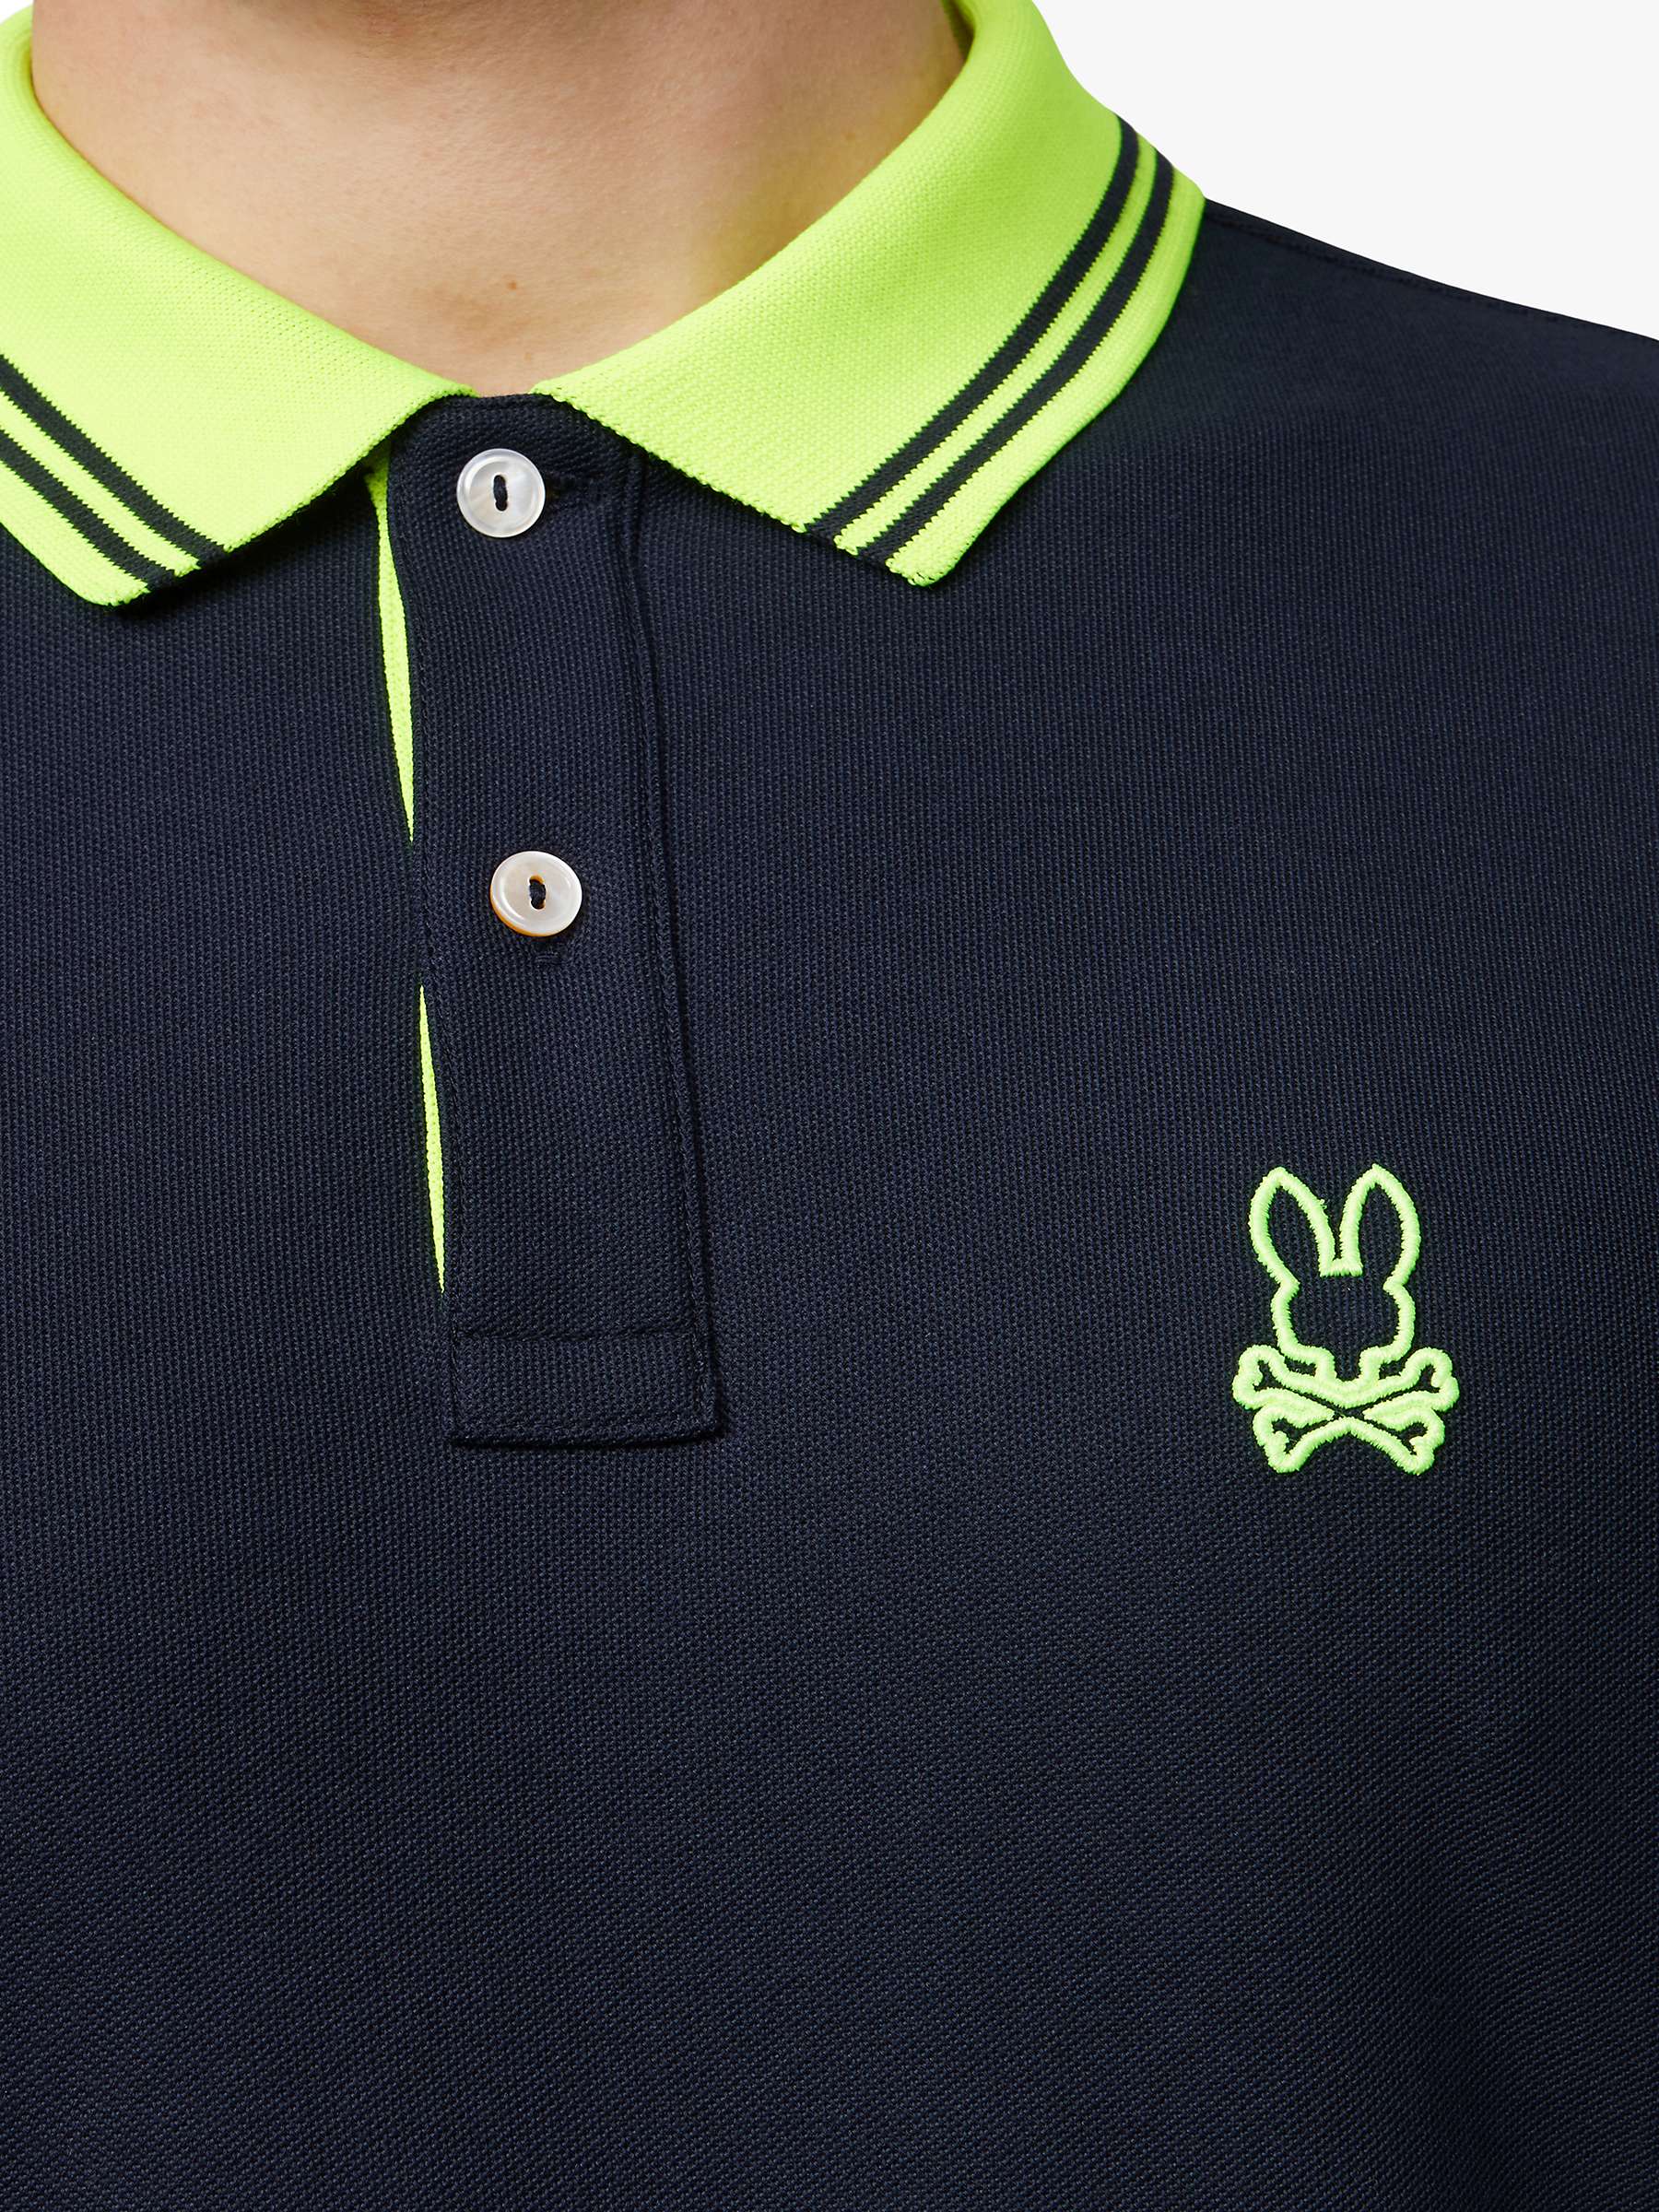 Buy Psycho Bunny Lancaster Pique Polo Top, Navy/Green Online at johnlewis.com